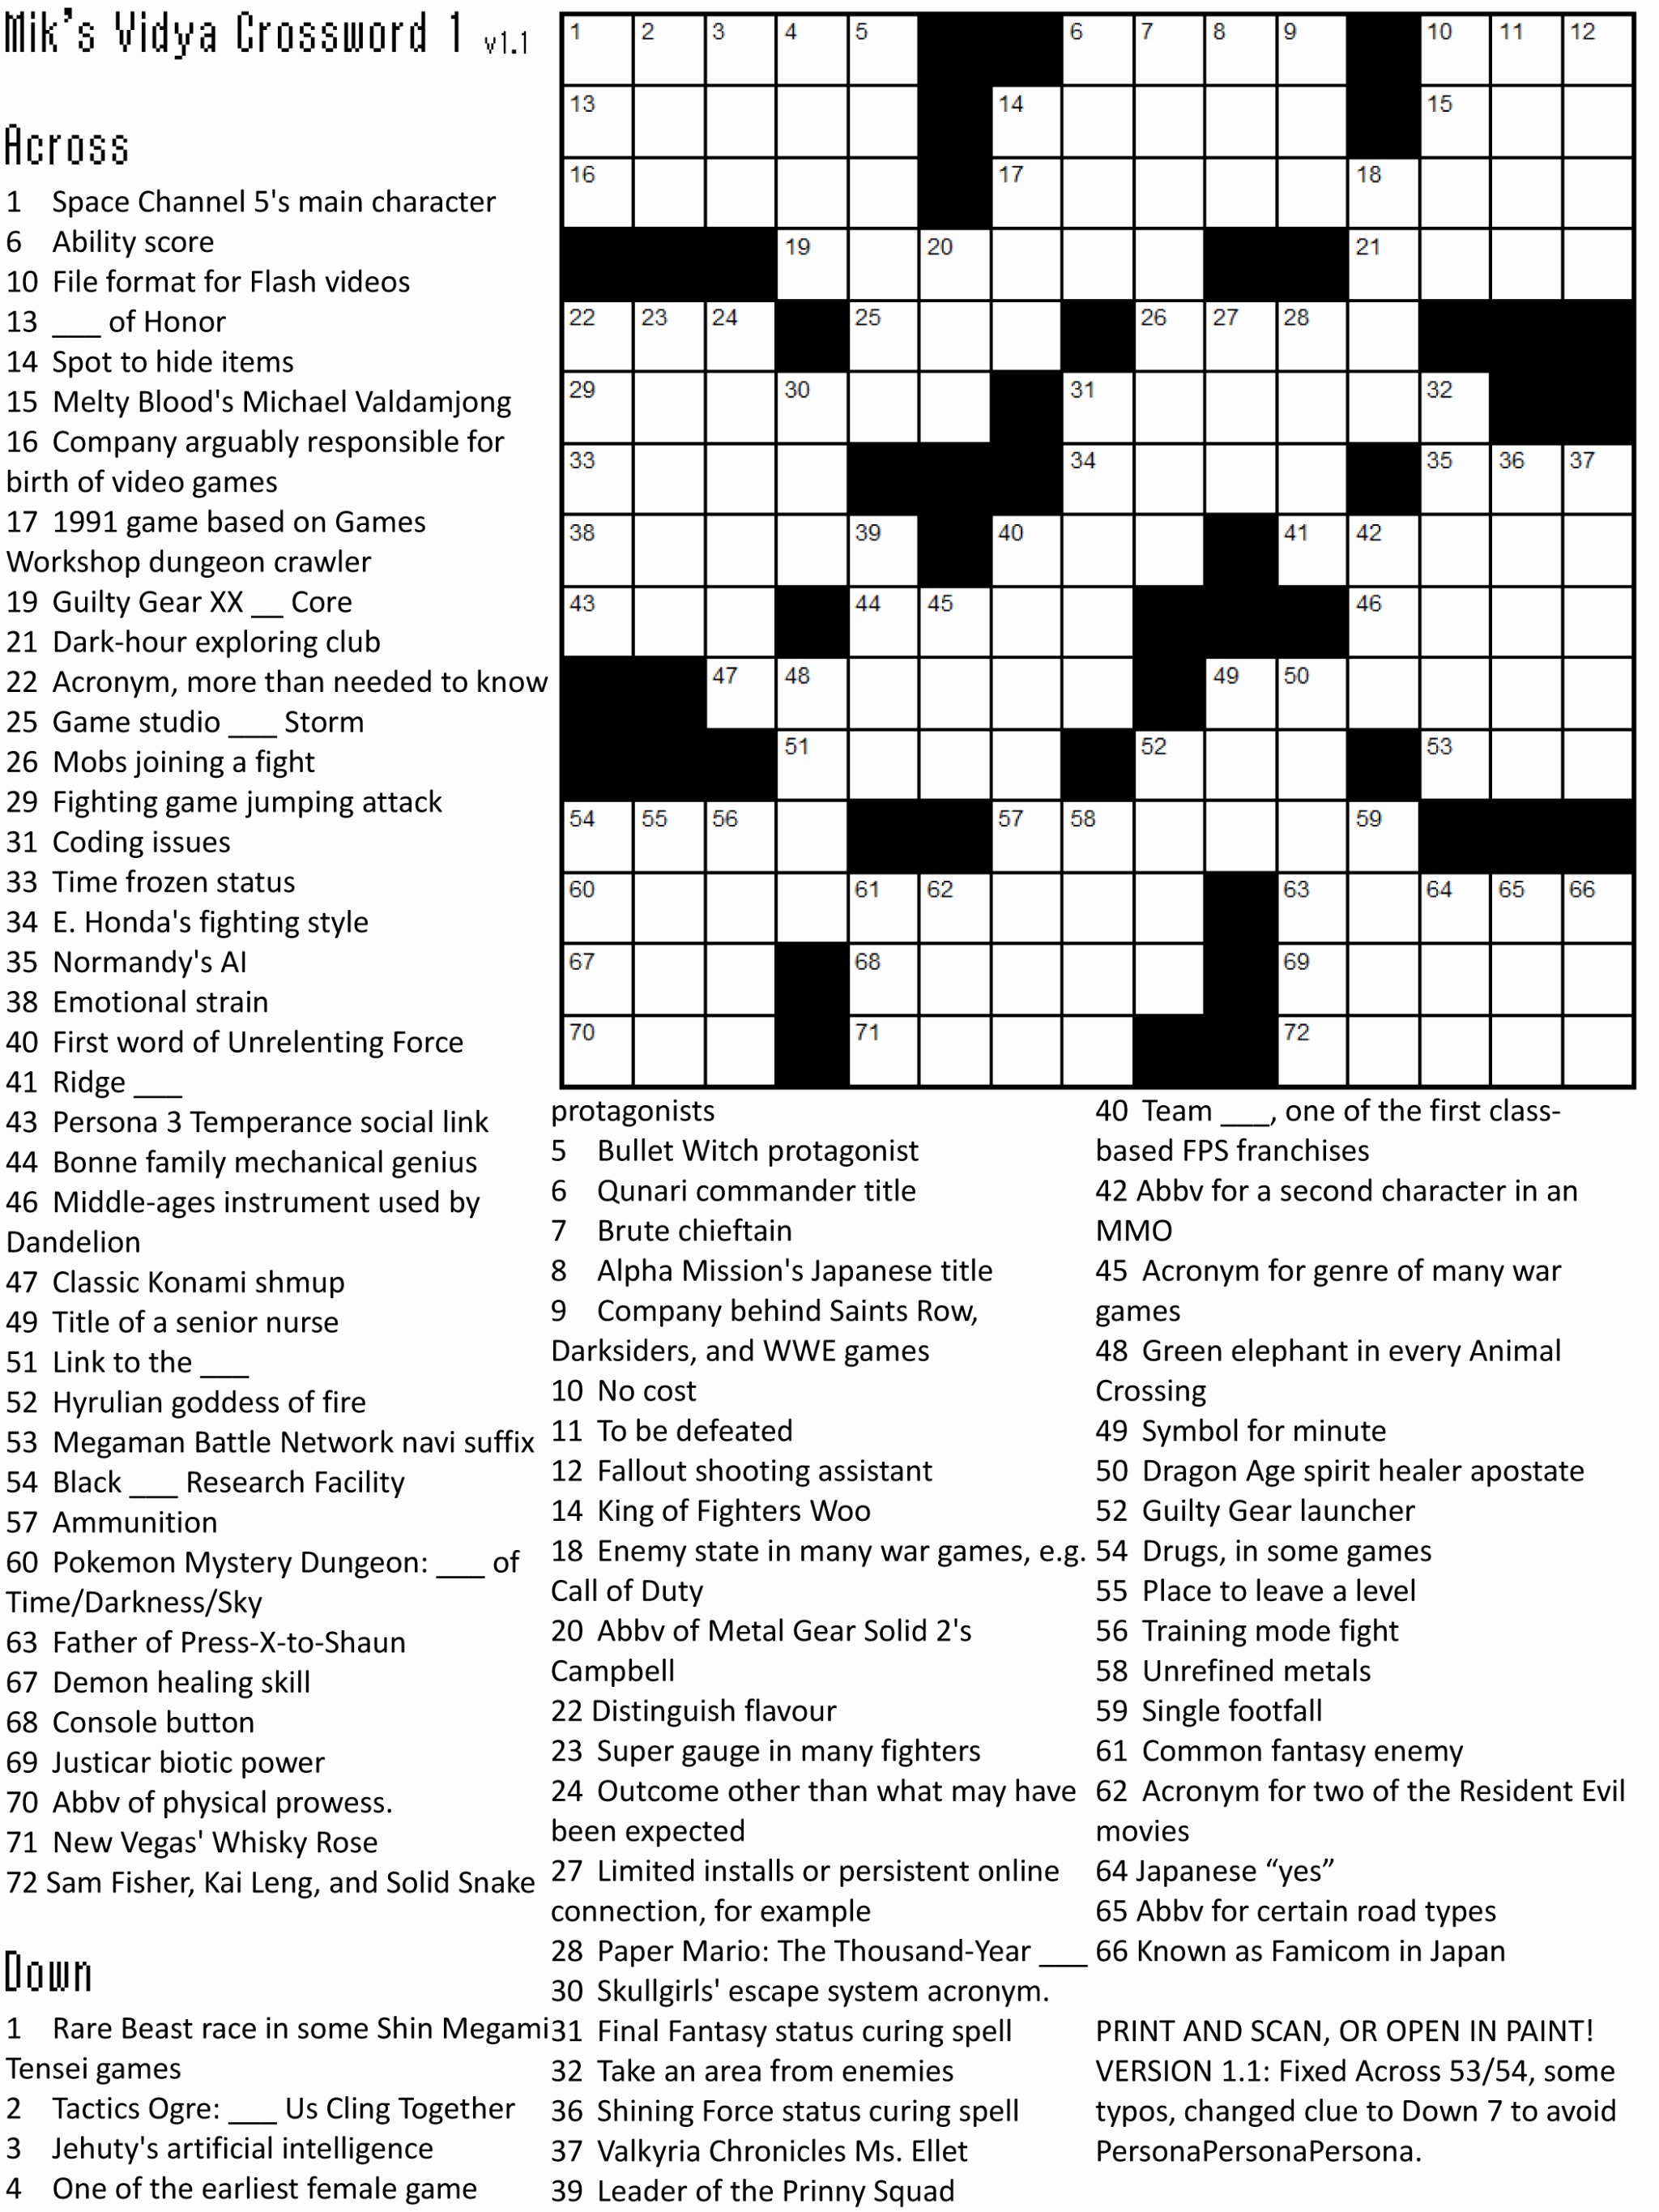 Free Crossword Puzzles Printable Then Free Printable Crossword - Free Easy Printable Crossword Puzzles For Kids